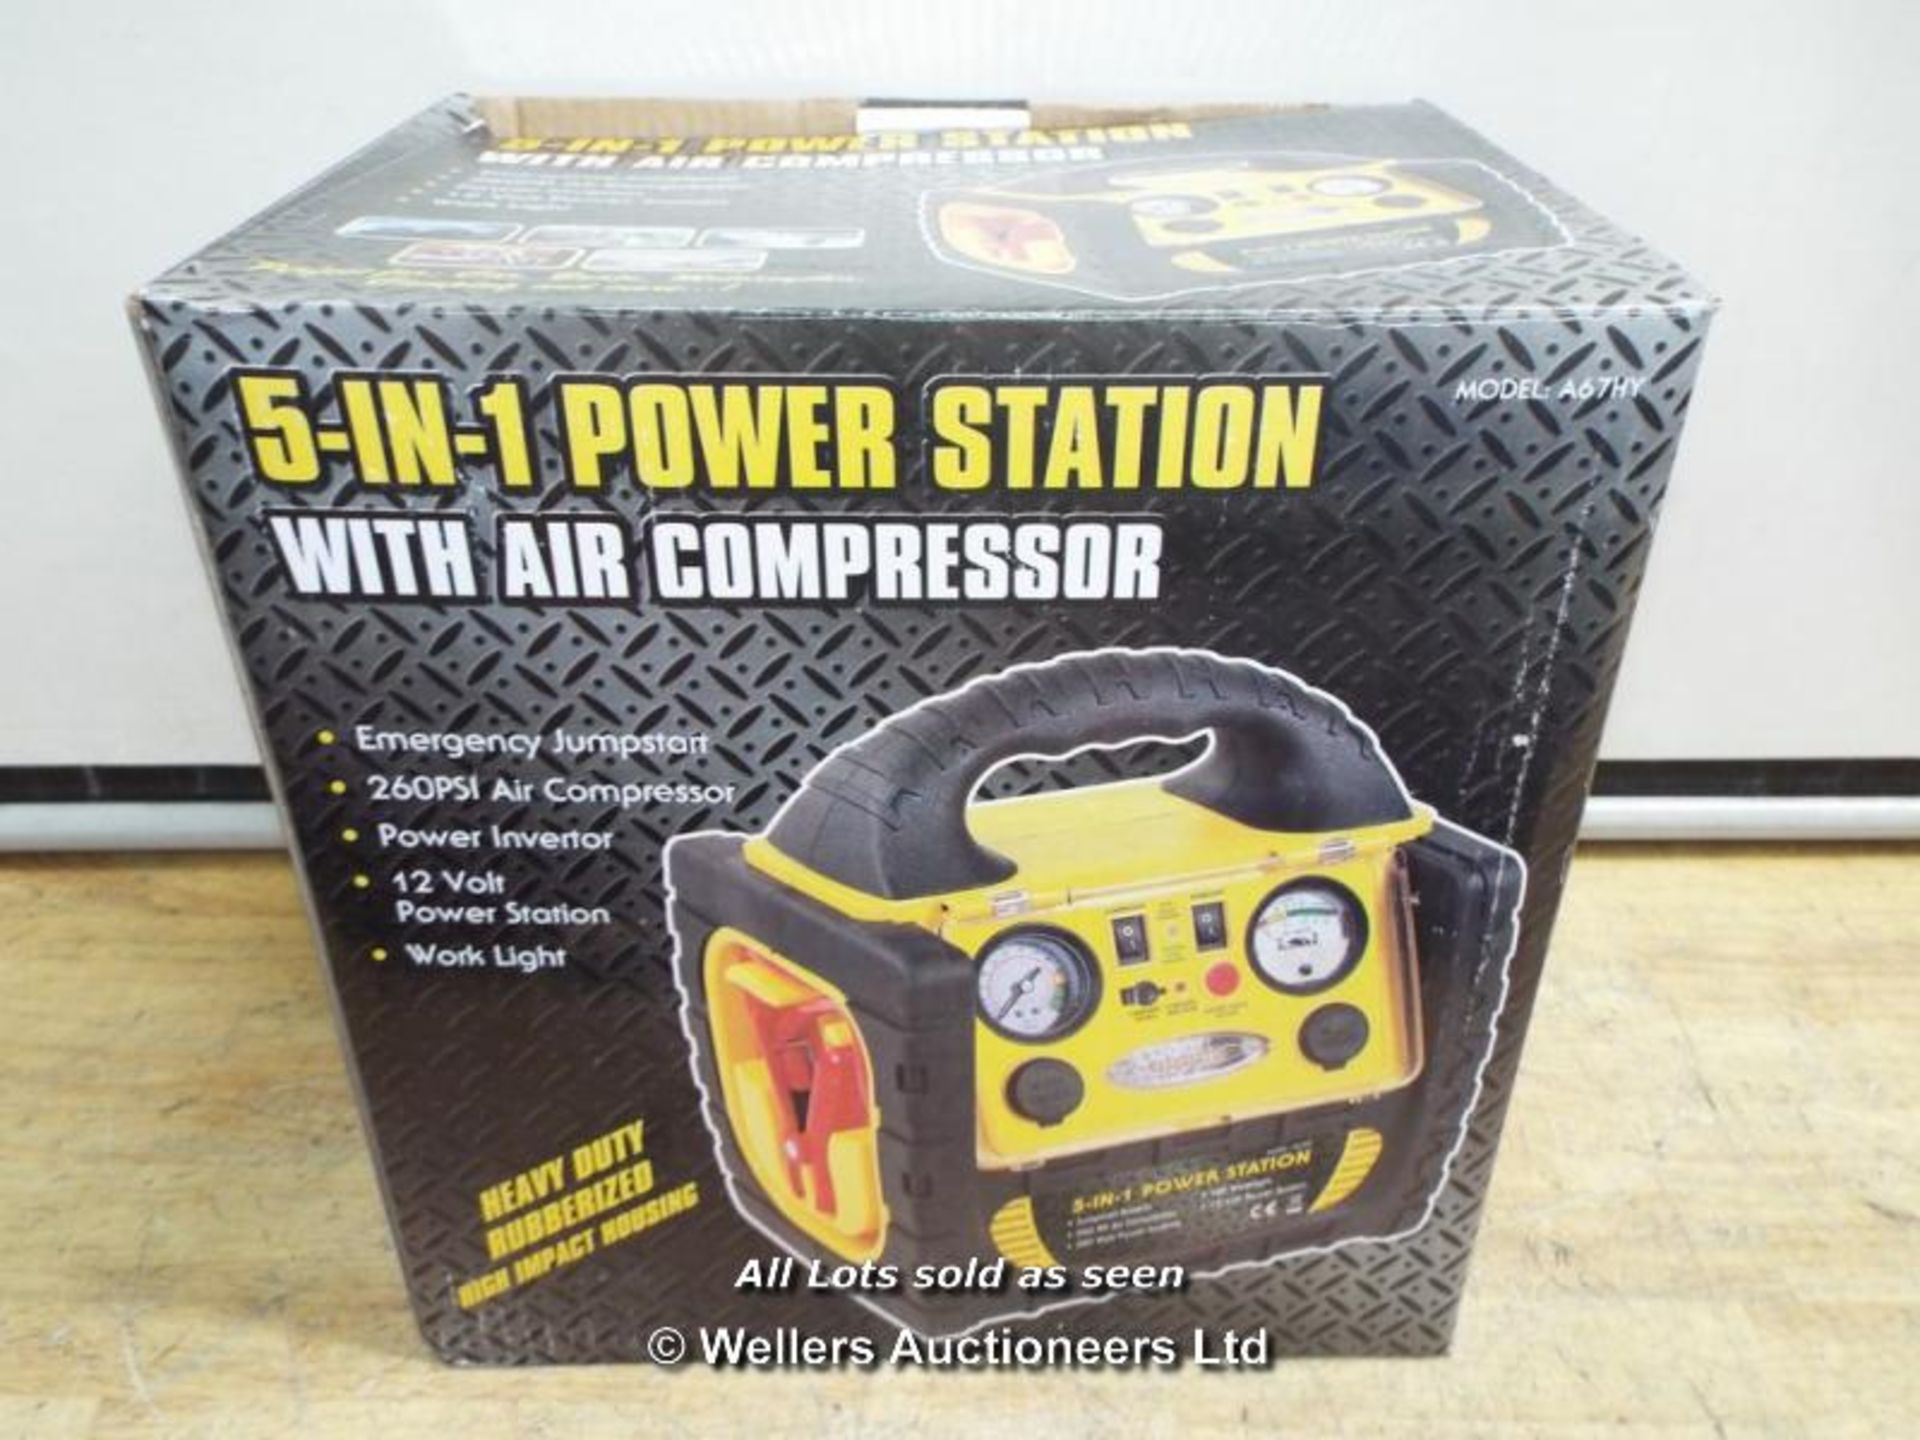 *PORTABLE POWER JUMP STARTER 5 IN 1 300A 260 PSI COMPRESSOR A67HY / GRADE: RETAIL RETURN  /